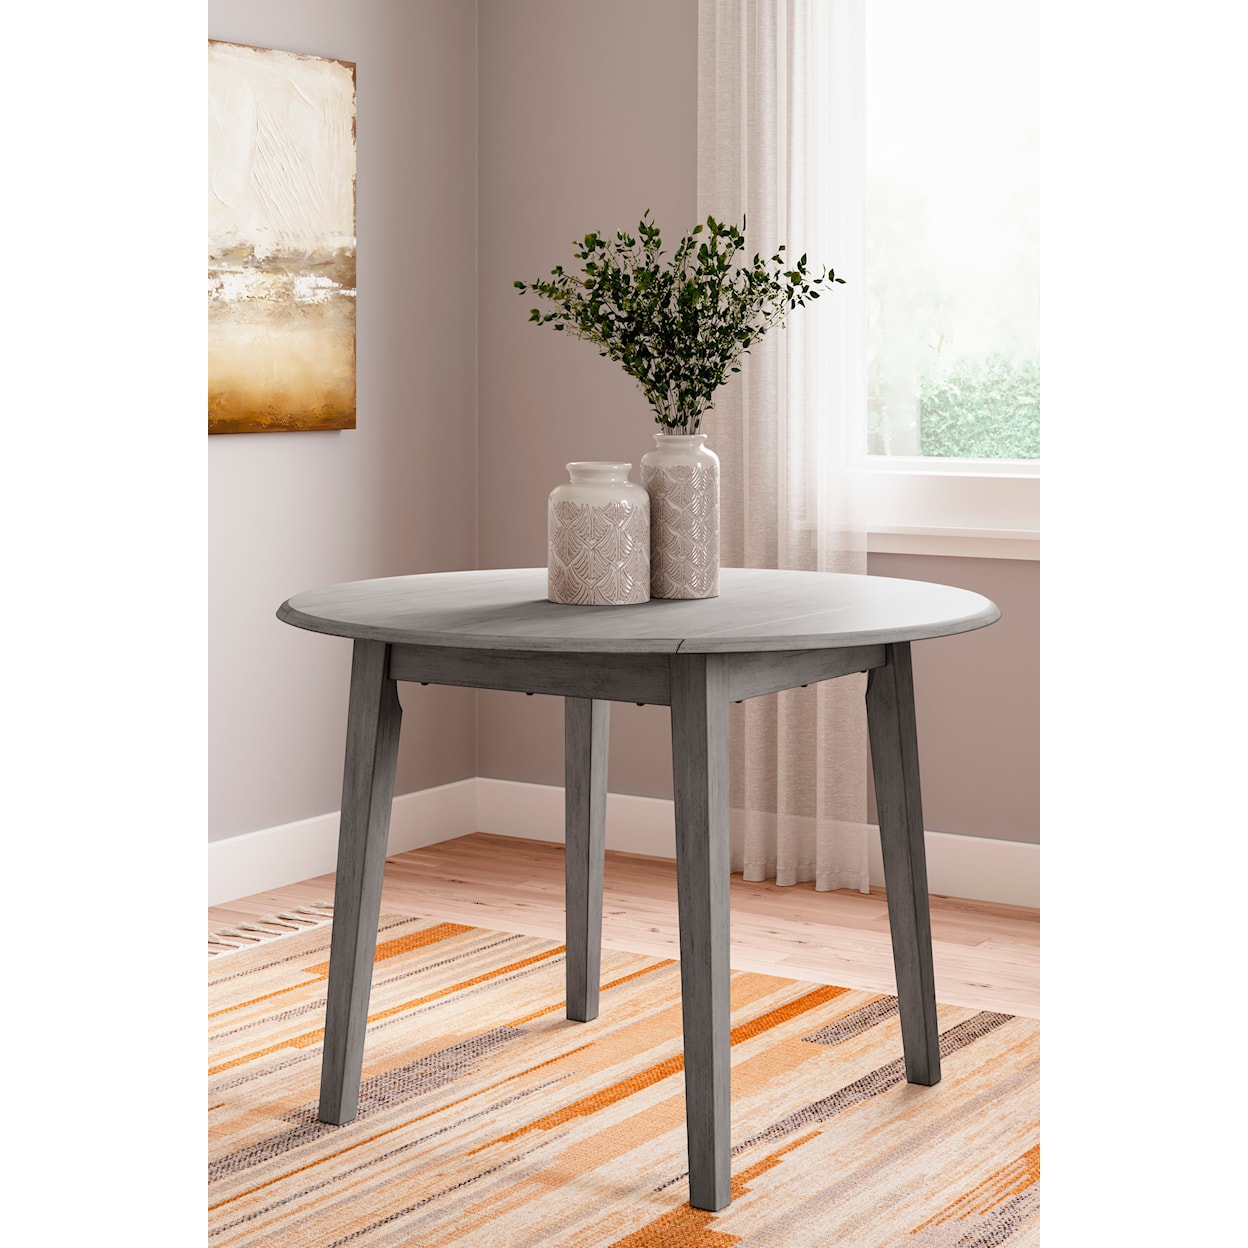 Michael Alan Select Shullden Drop Leaf Dining Table